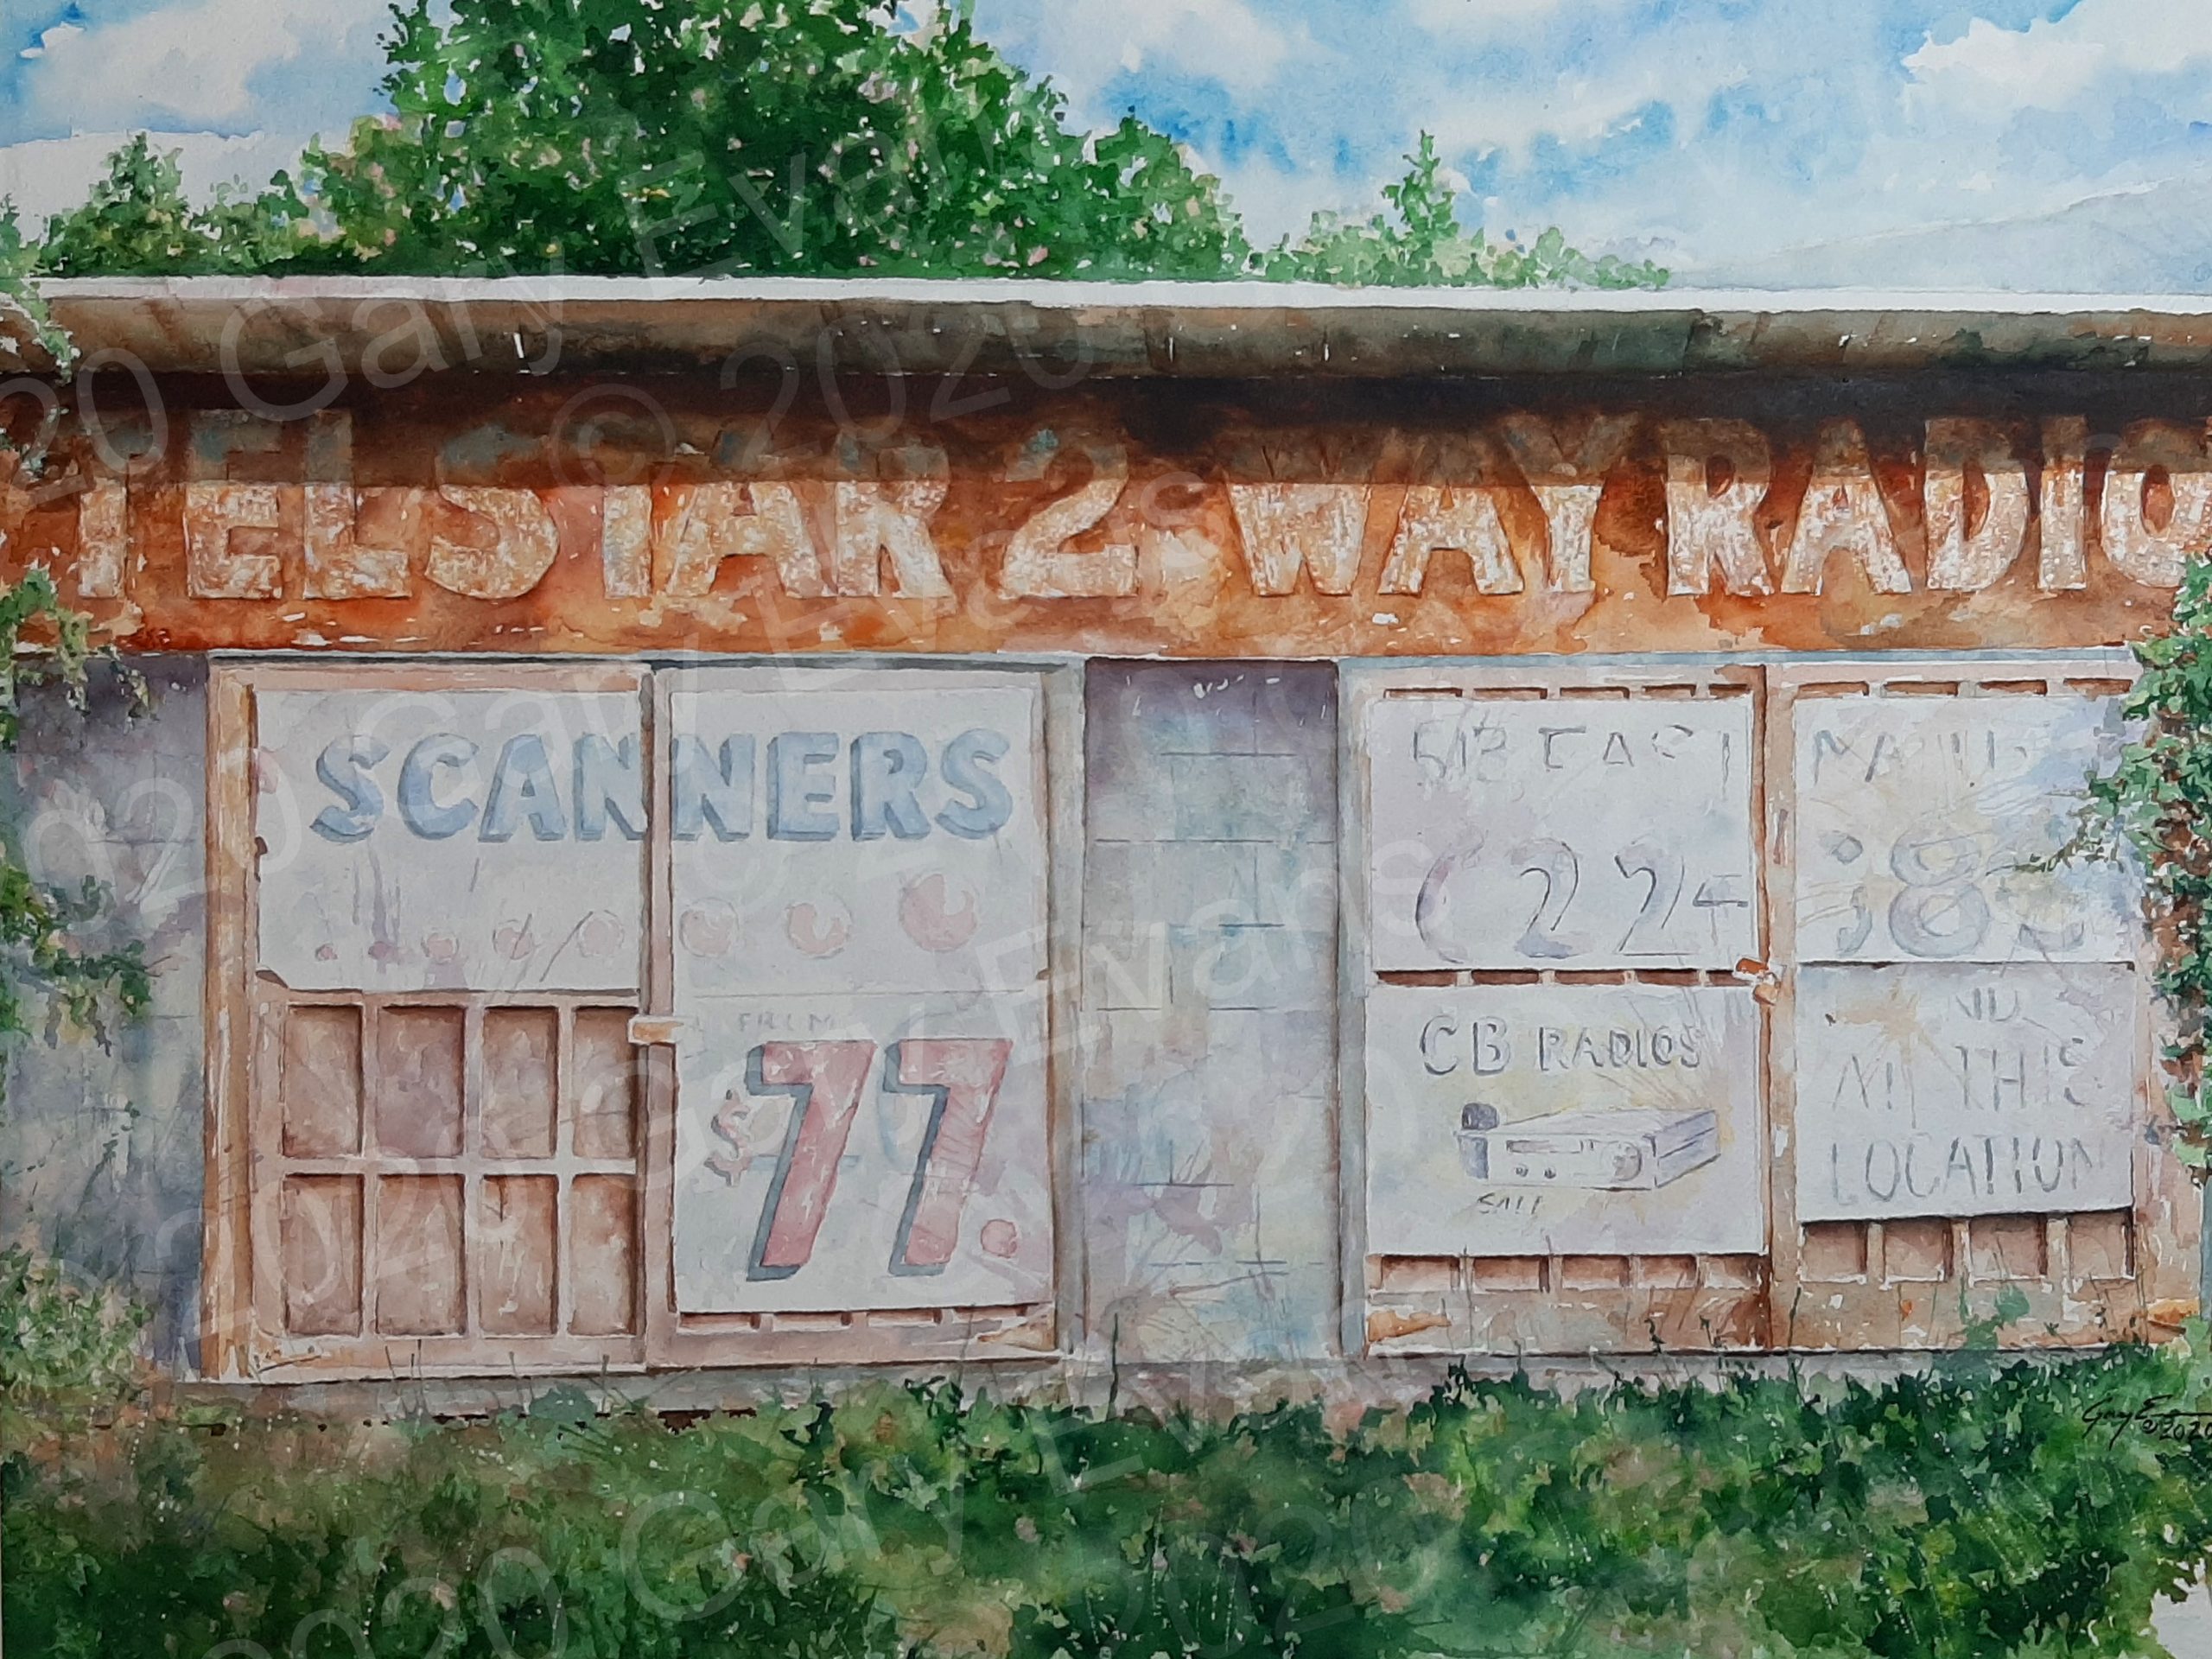 Scanners Shack